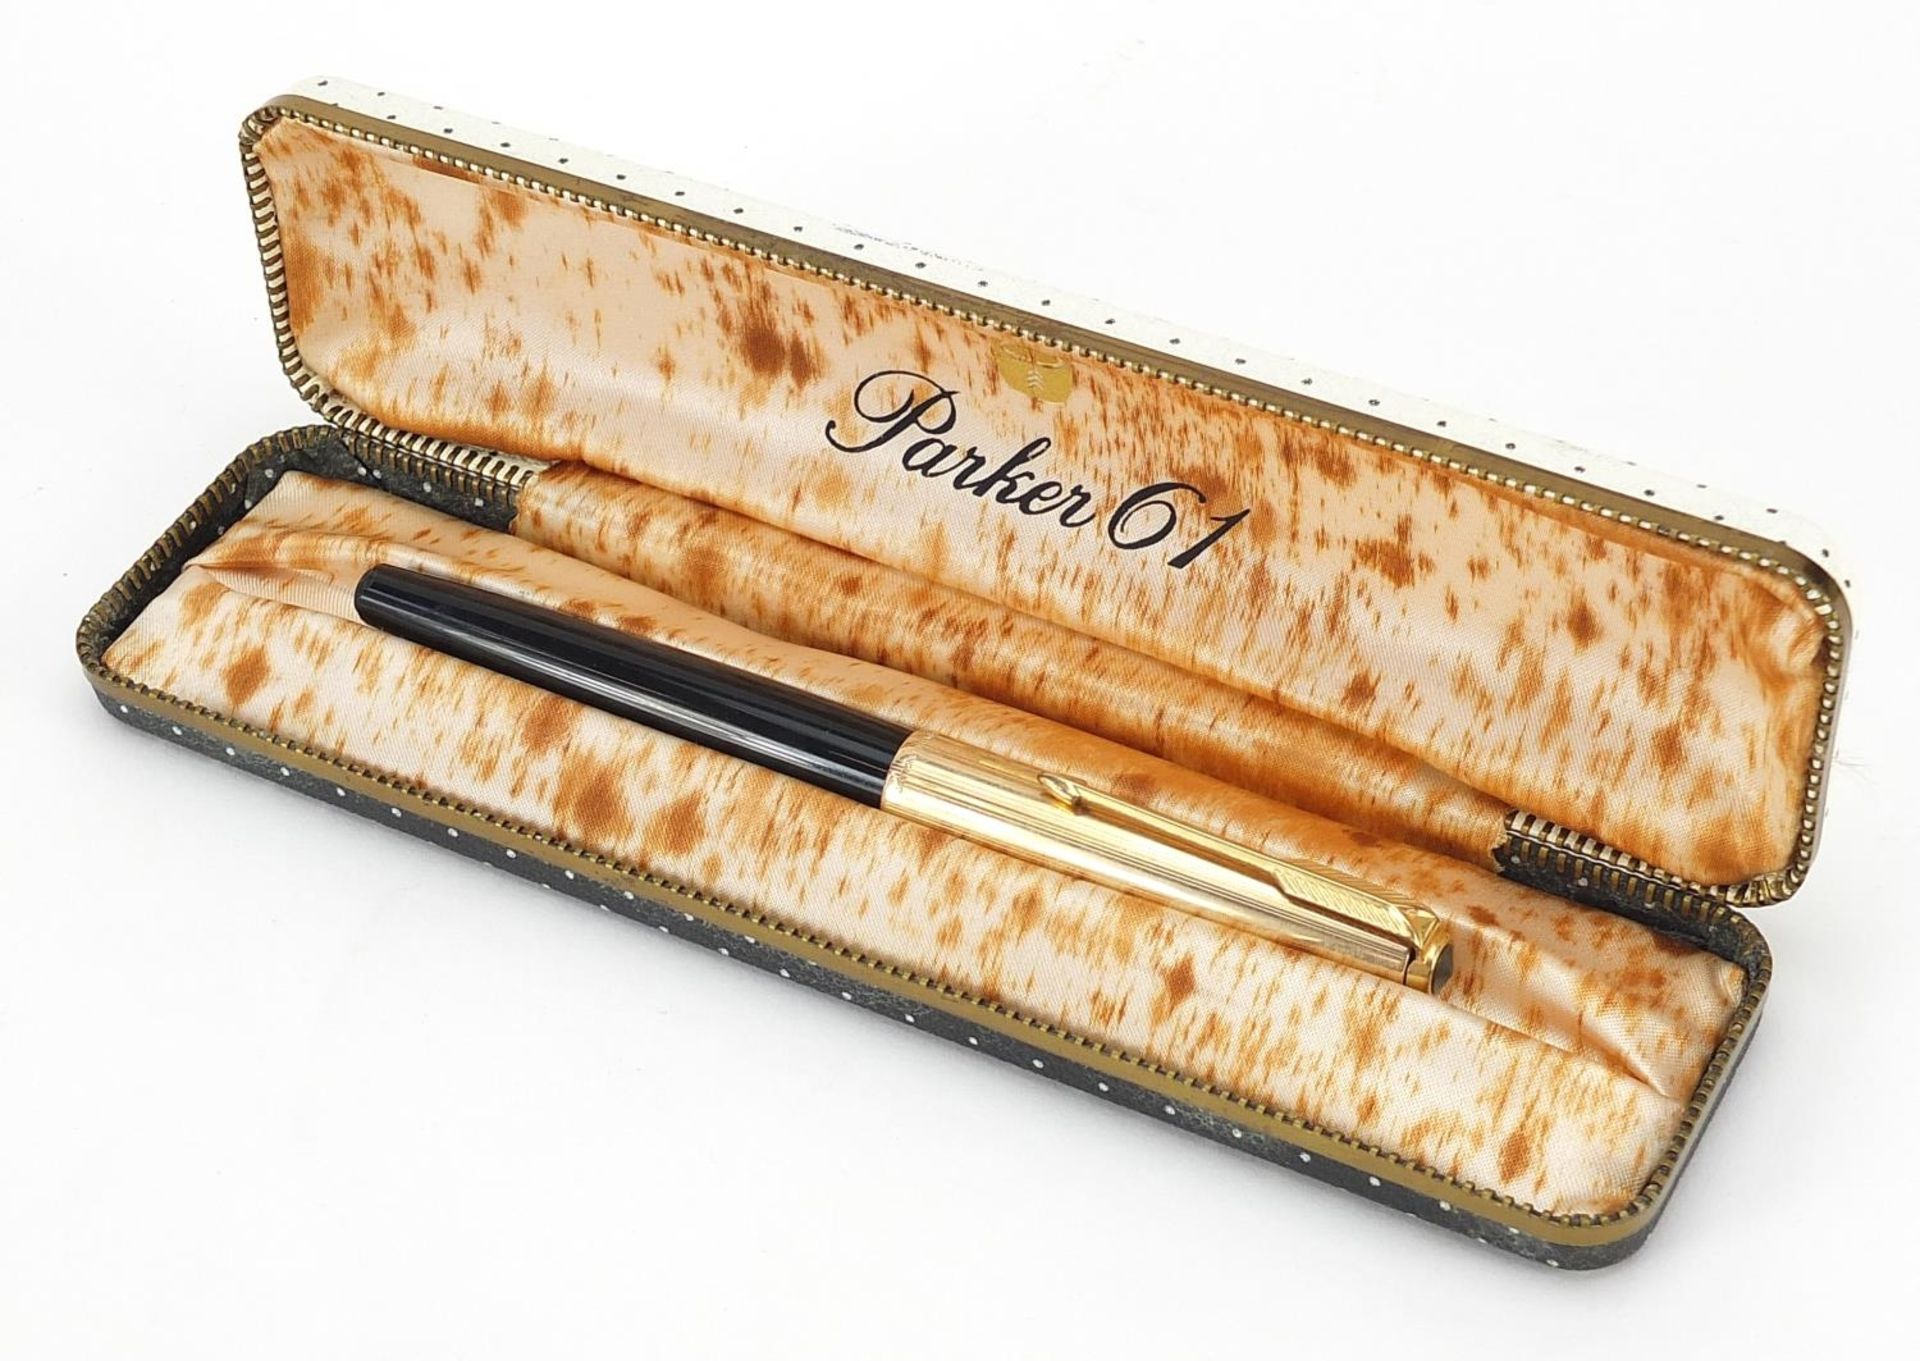 Vintage Parker 61 fountain pen with case - Image 6 of 7